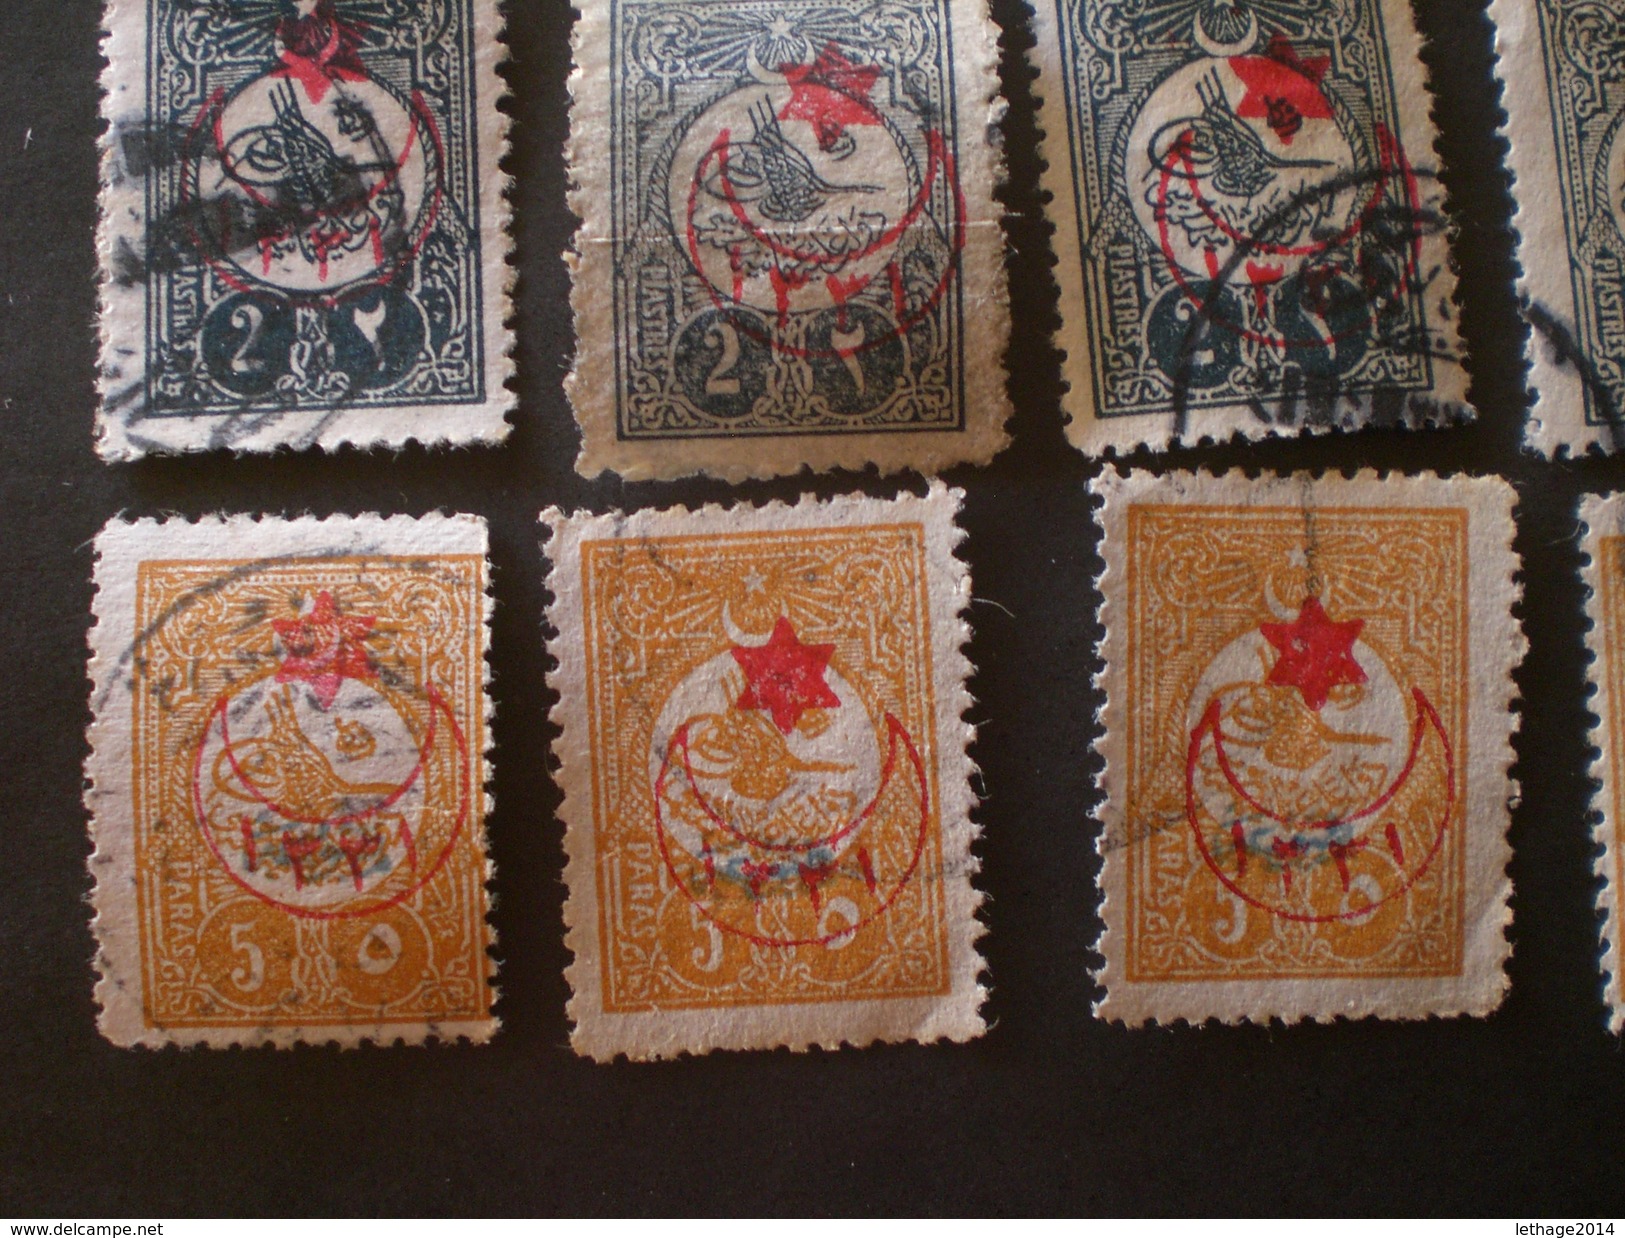 Türkiye Turkey TURQUIE OTTOMAN 1915 stamps for the interior  ( TUGHRA ) NUMBER LOW OVERPRINTED STAR 6 POINT